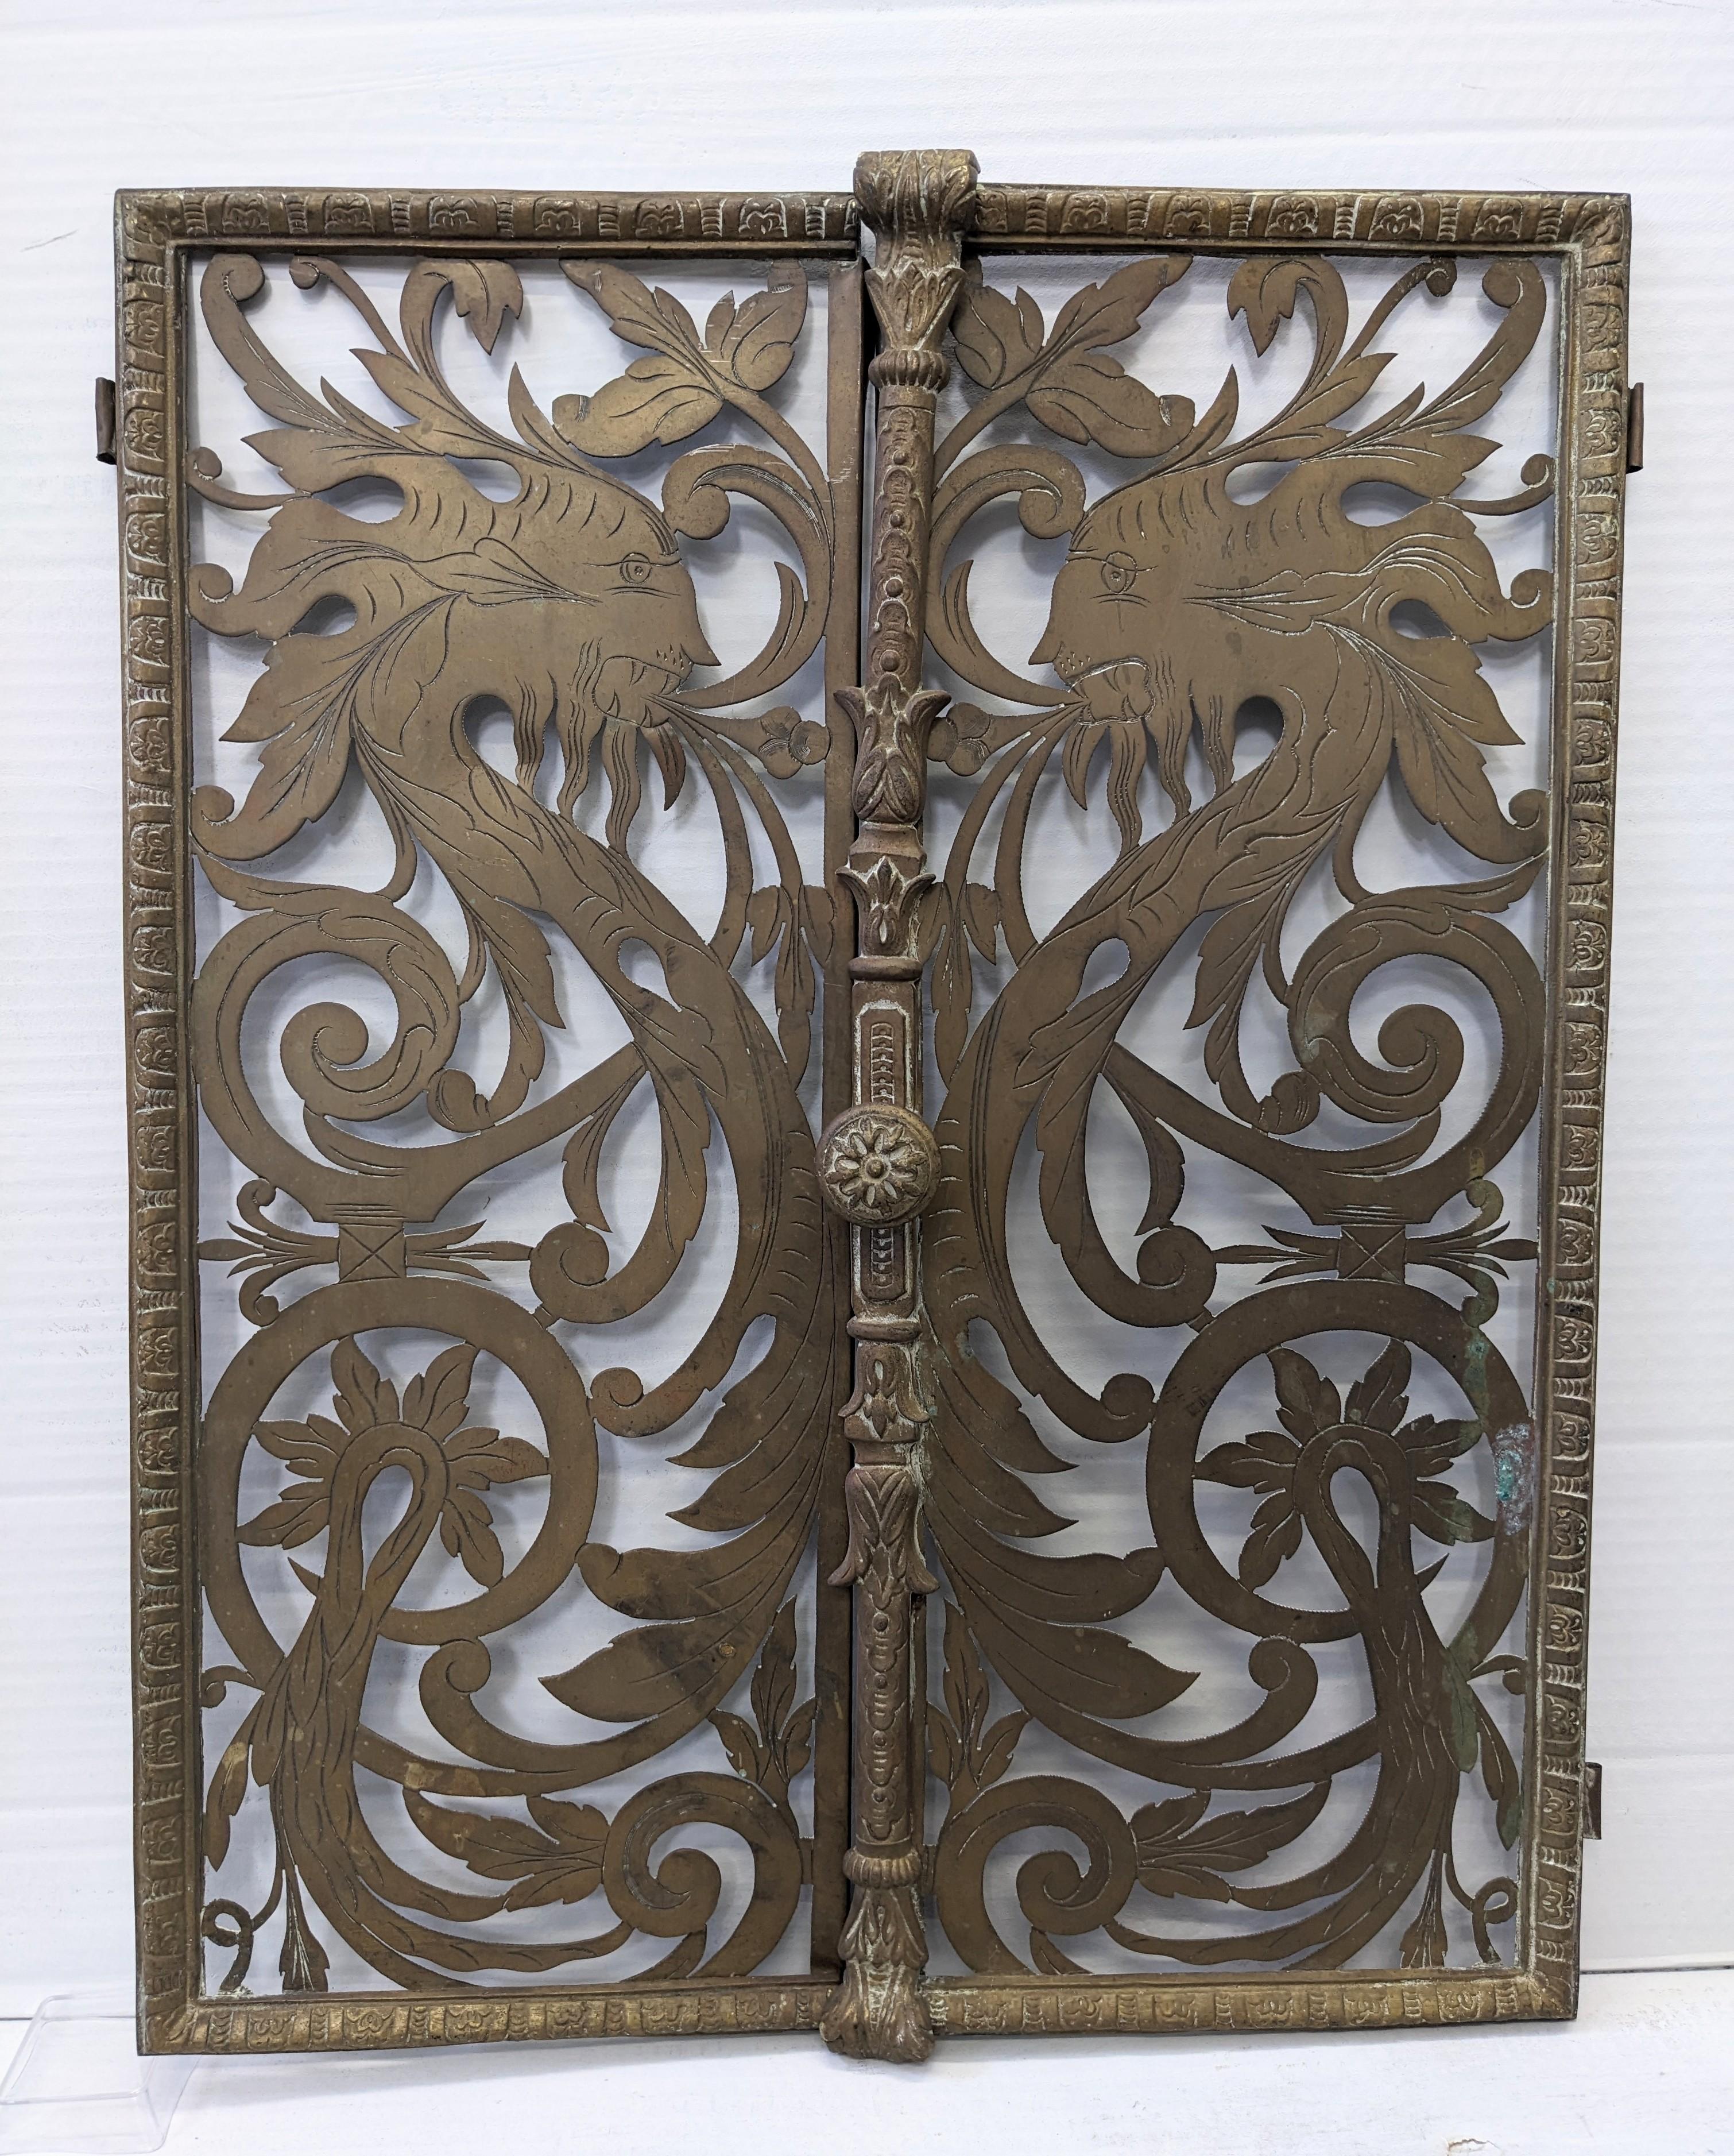 Pair of Victorian Pierced and Etched Brass Griffin Motif Gates from the late 19th Century, designed as openwork panels with swirls and griffins cut into the metal. Would be great repurposed for a pet house!
Panel with knob 9.5